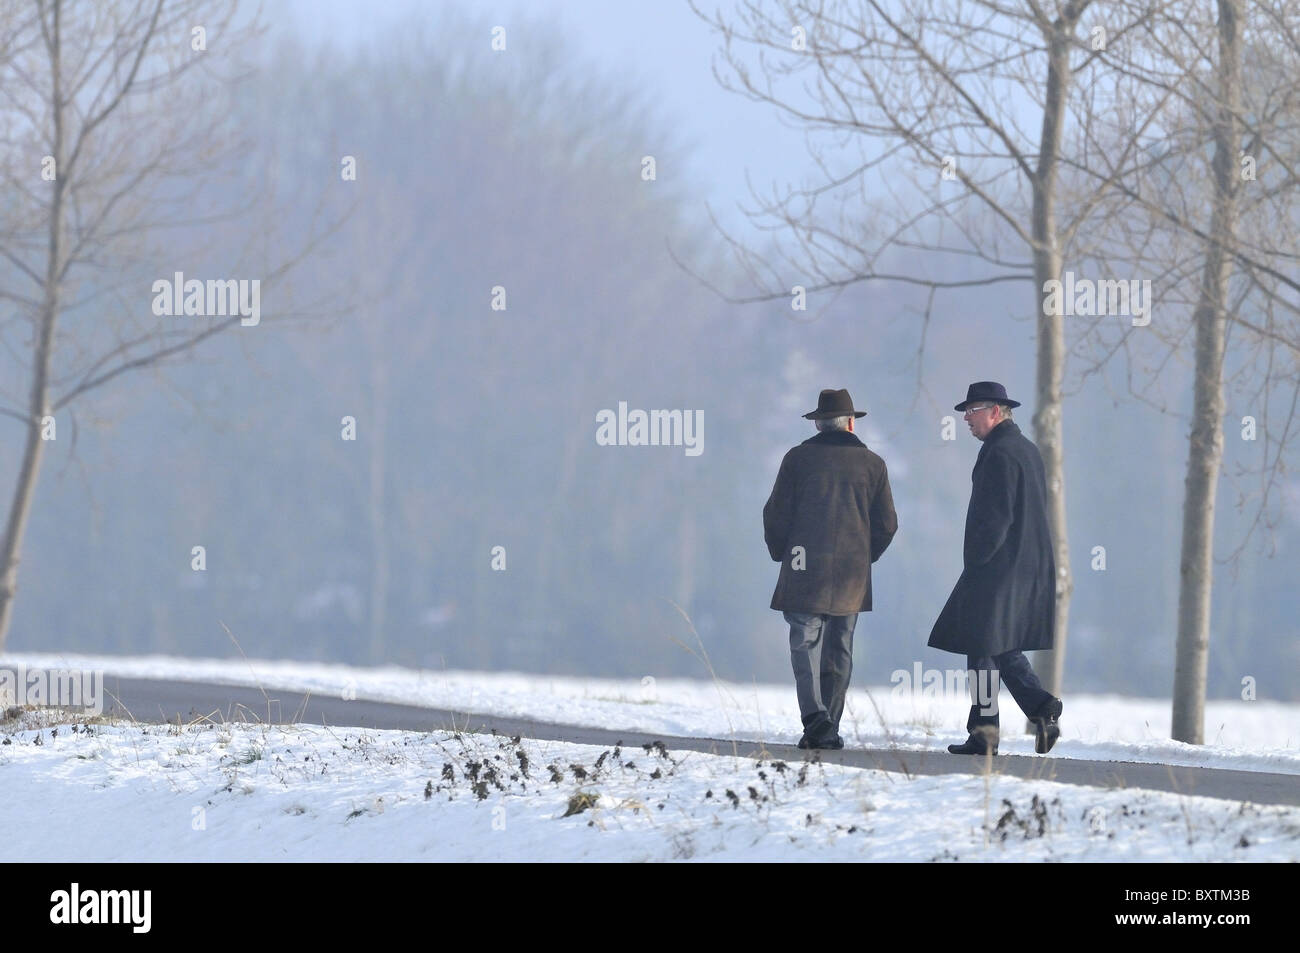 Two men talking seriously in black clothing in de snow Stock Photo